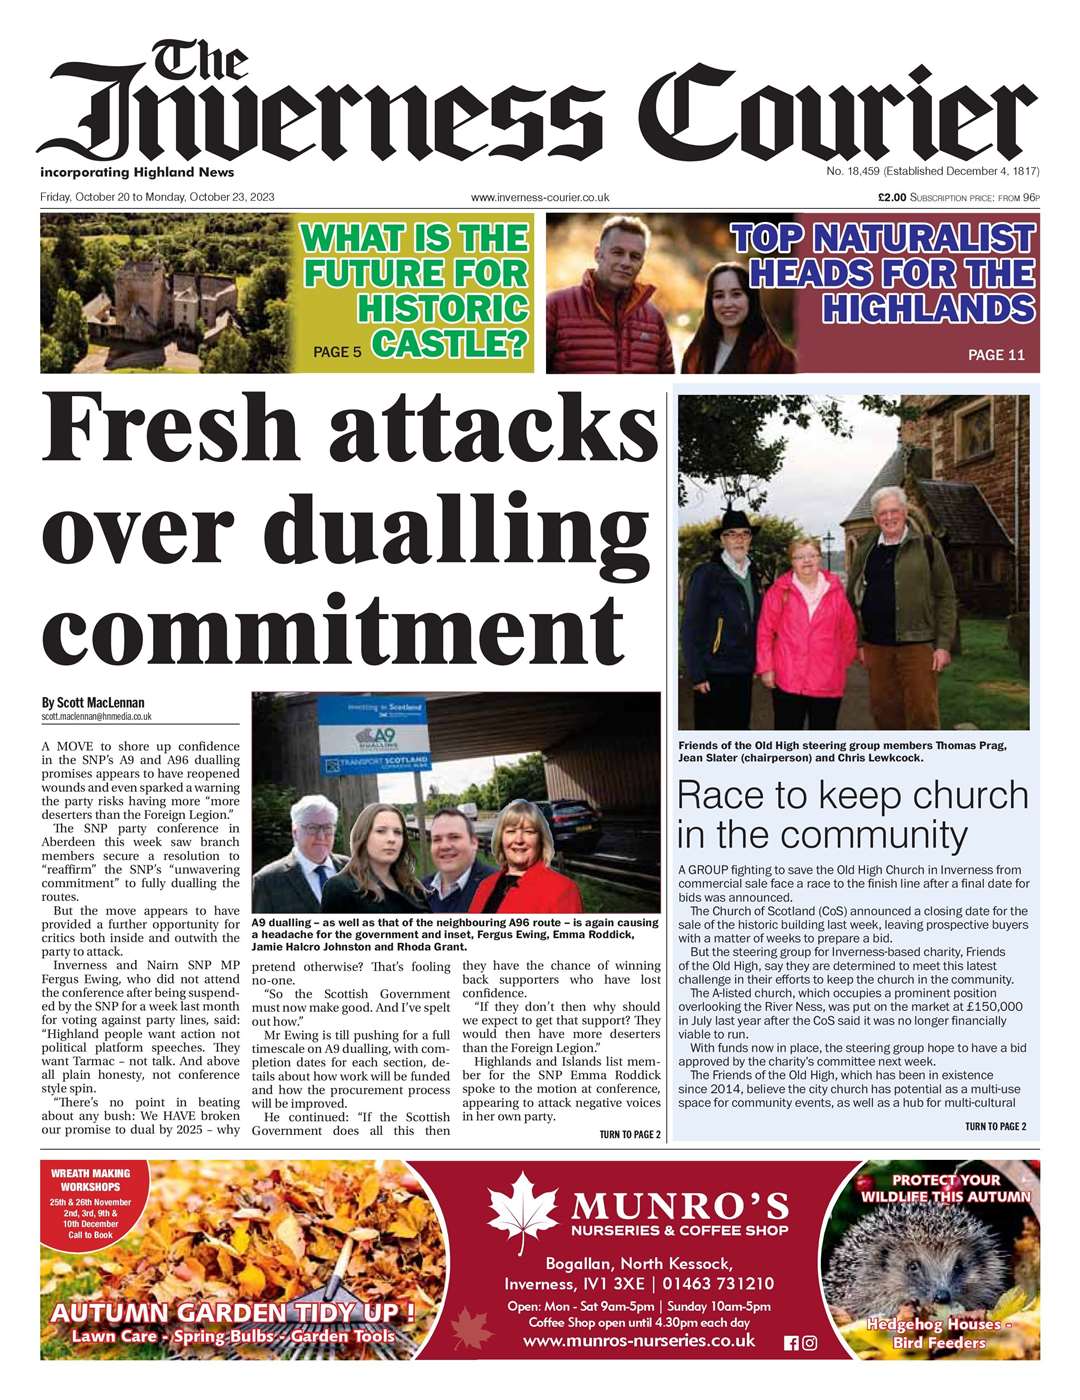 The Inverness Courier, October 20, front page.